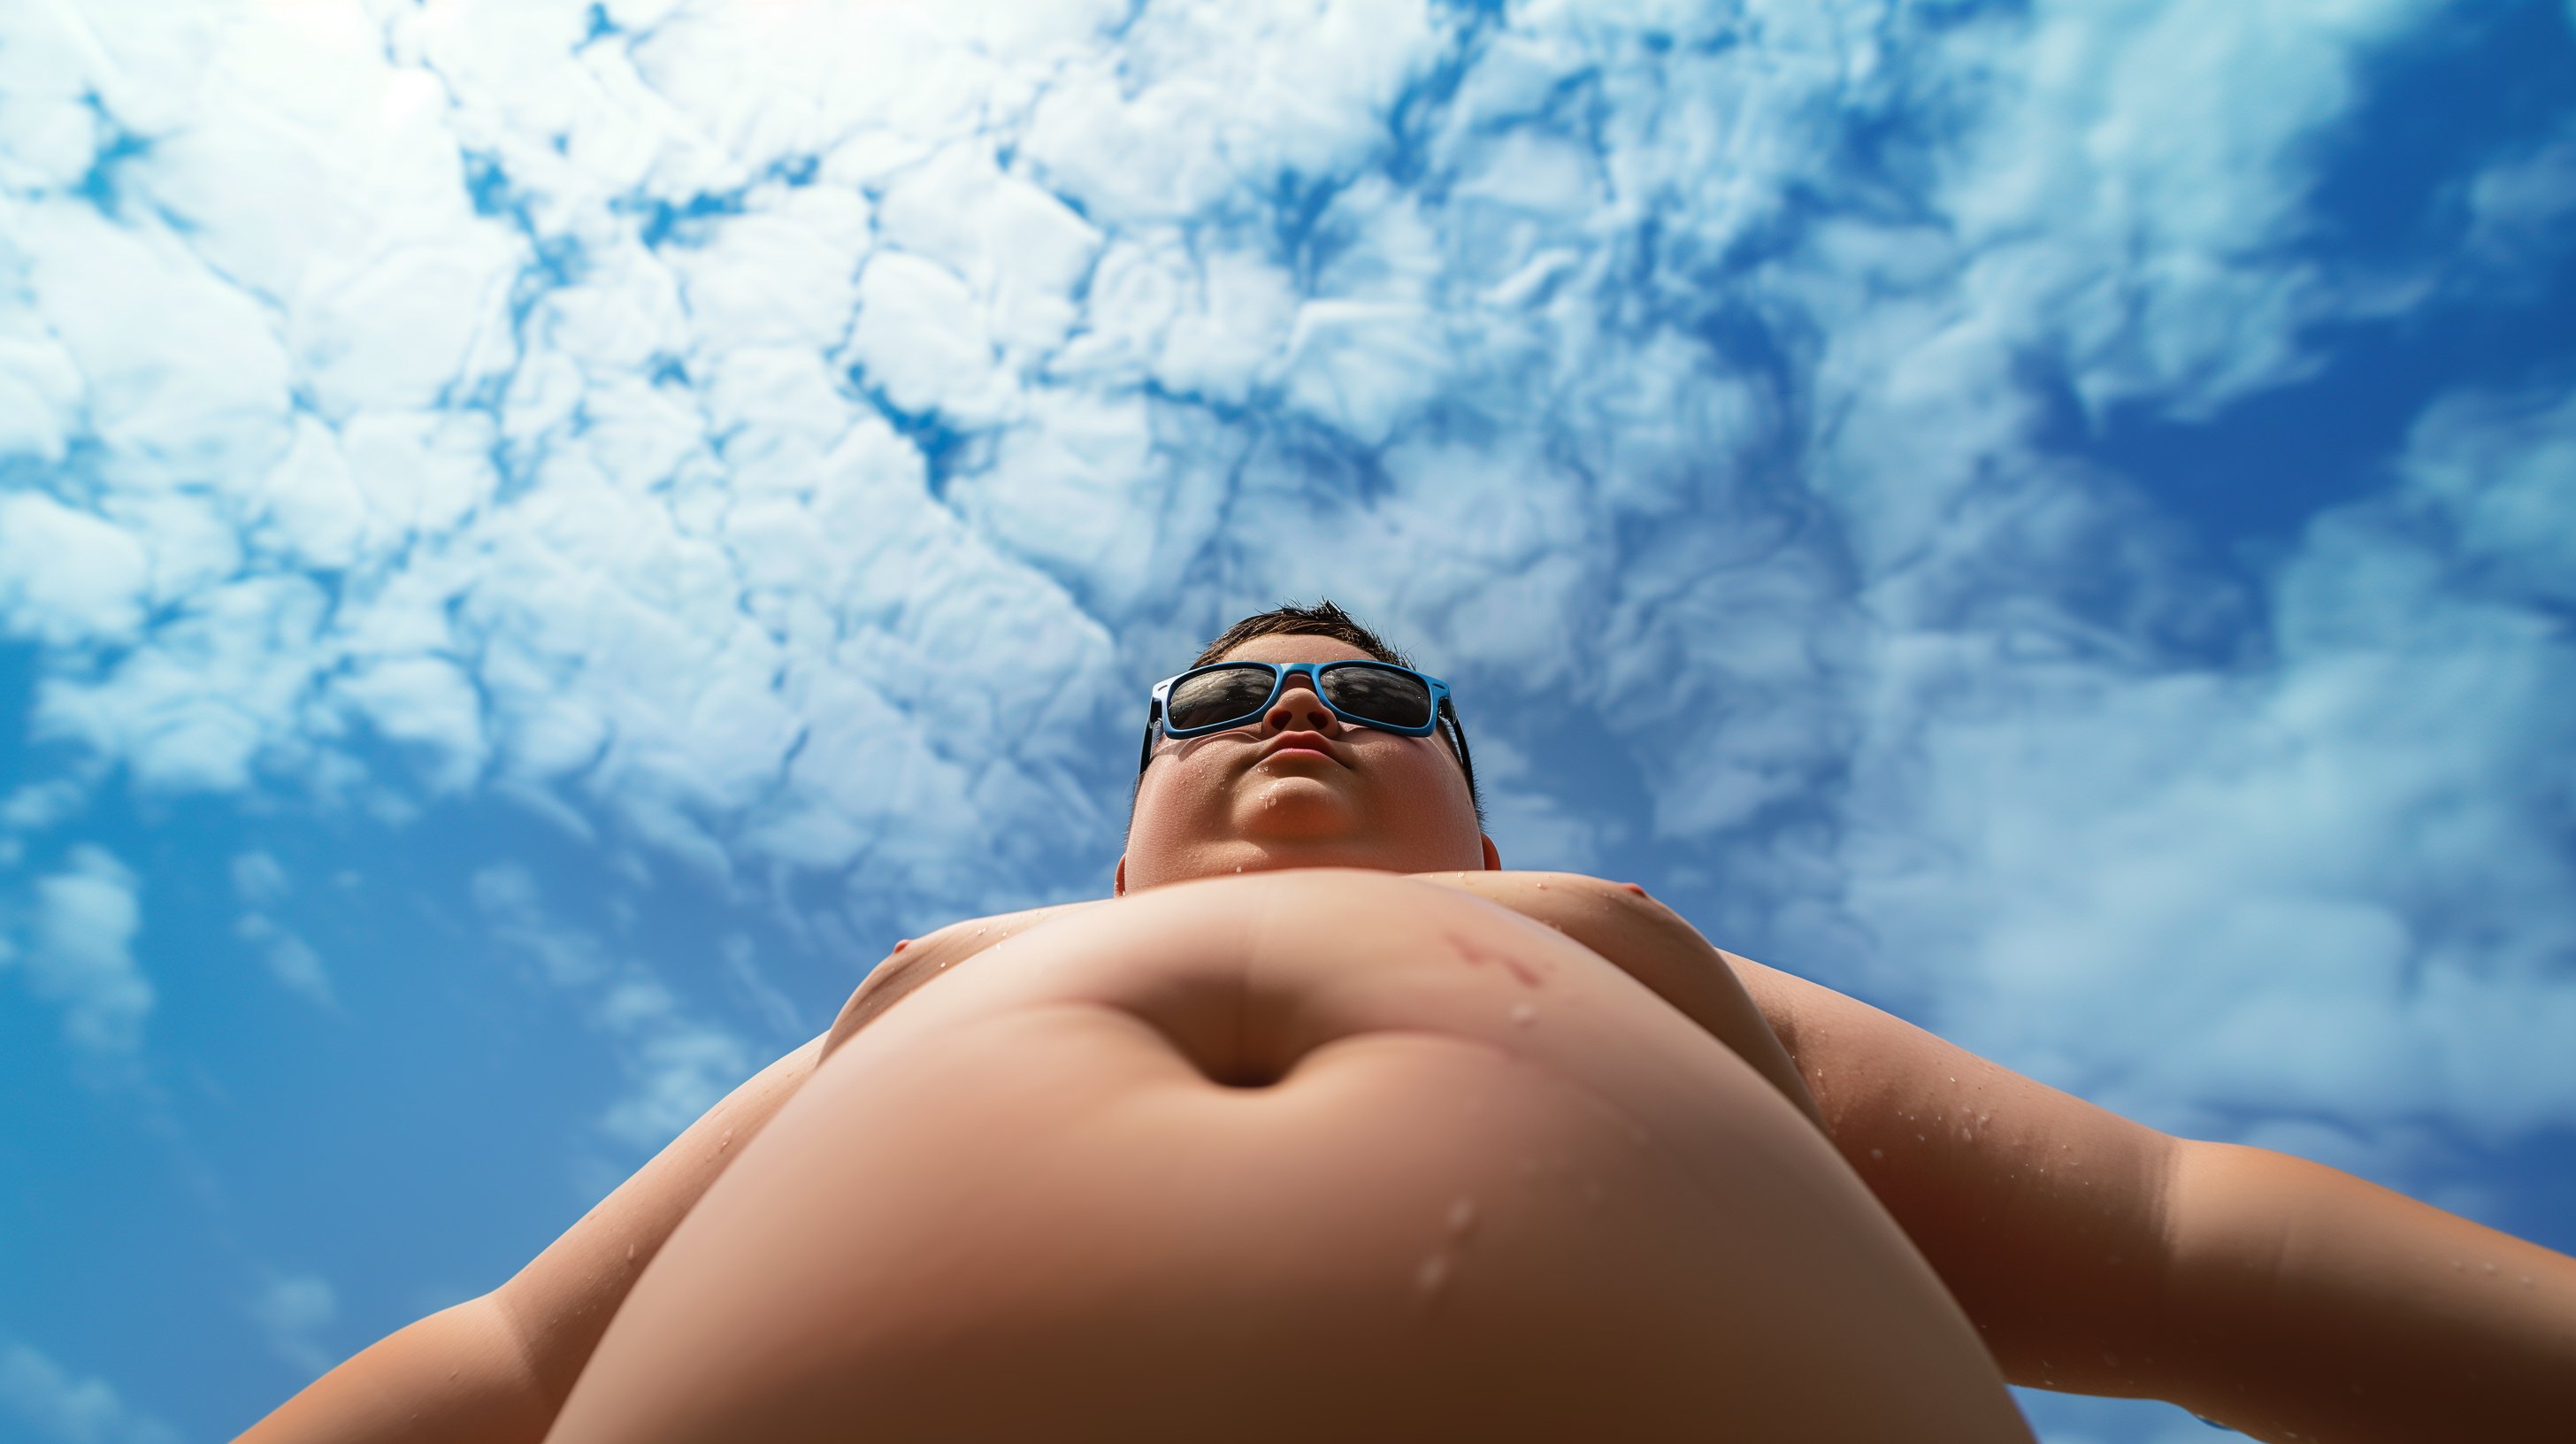 milobruvf1737_low-angle_photo_from_below_of_an_overweight_boy_w_